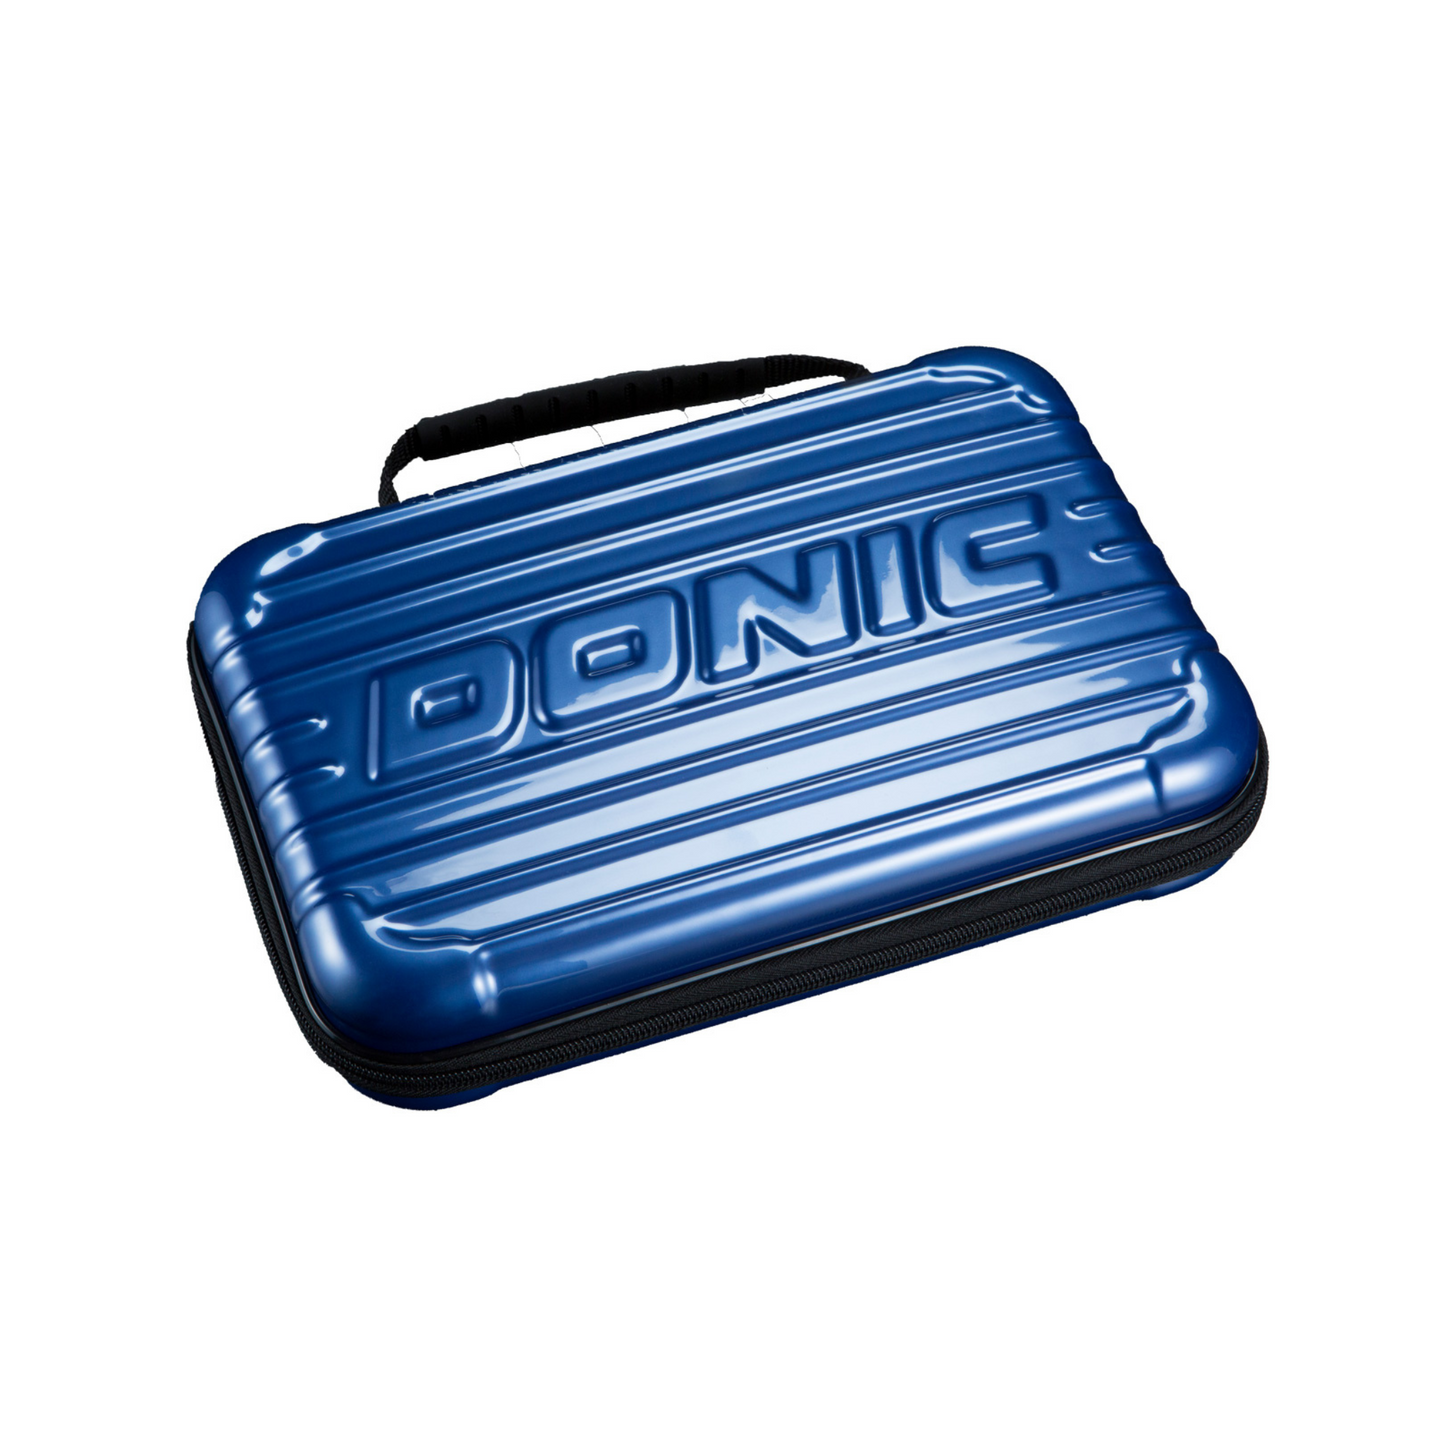 Donic Hard Case Double Bat Cover